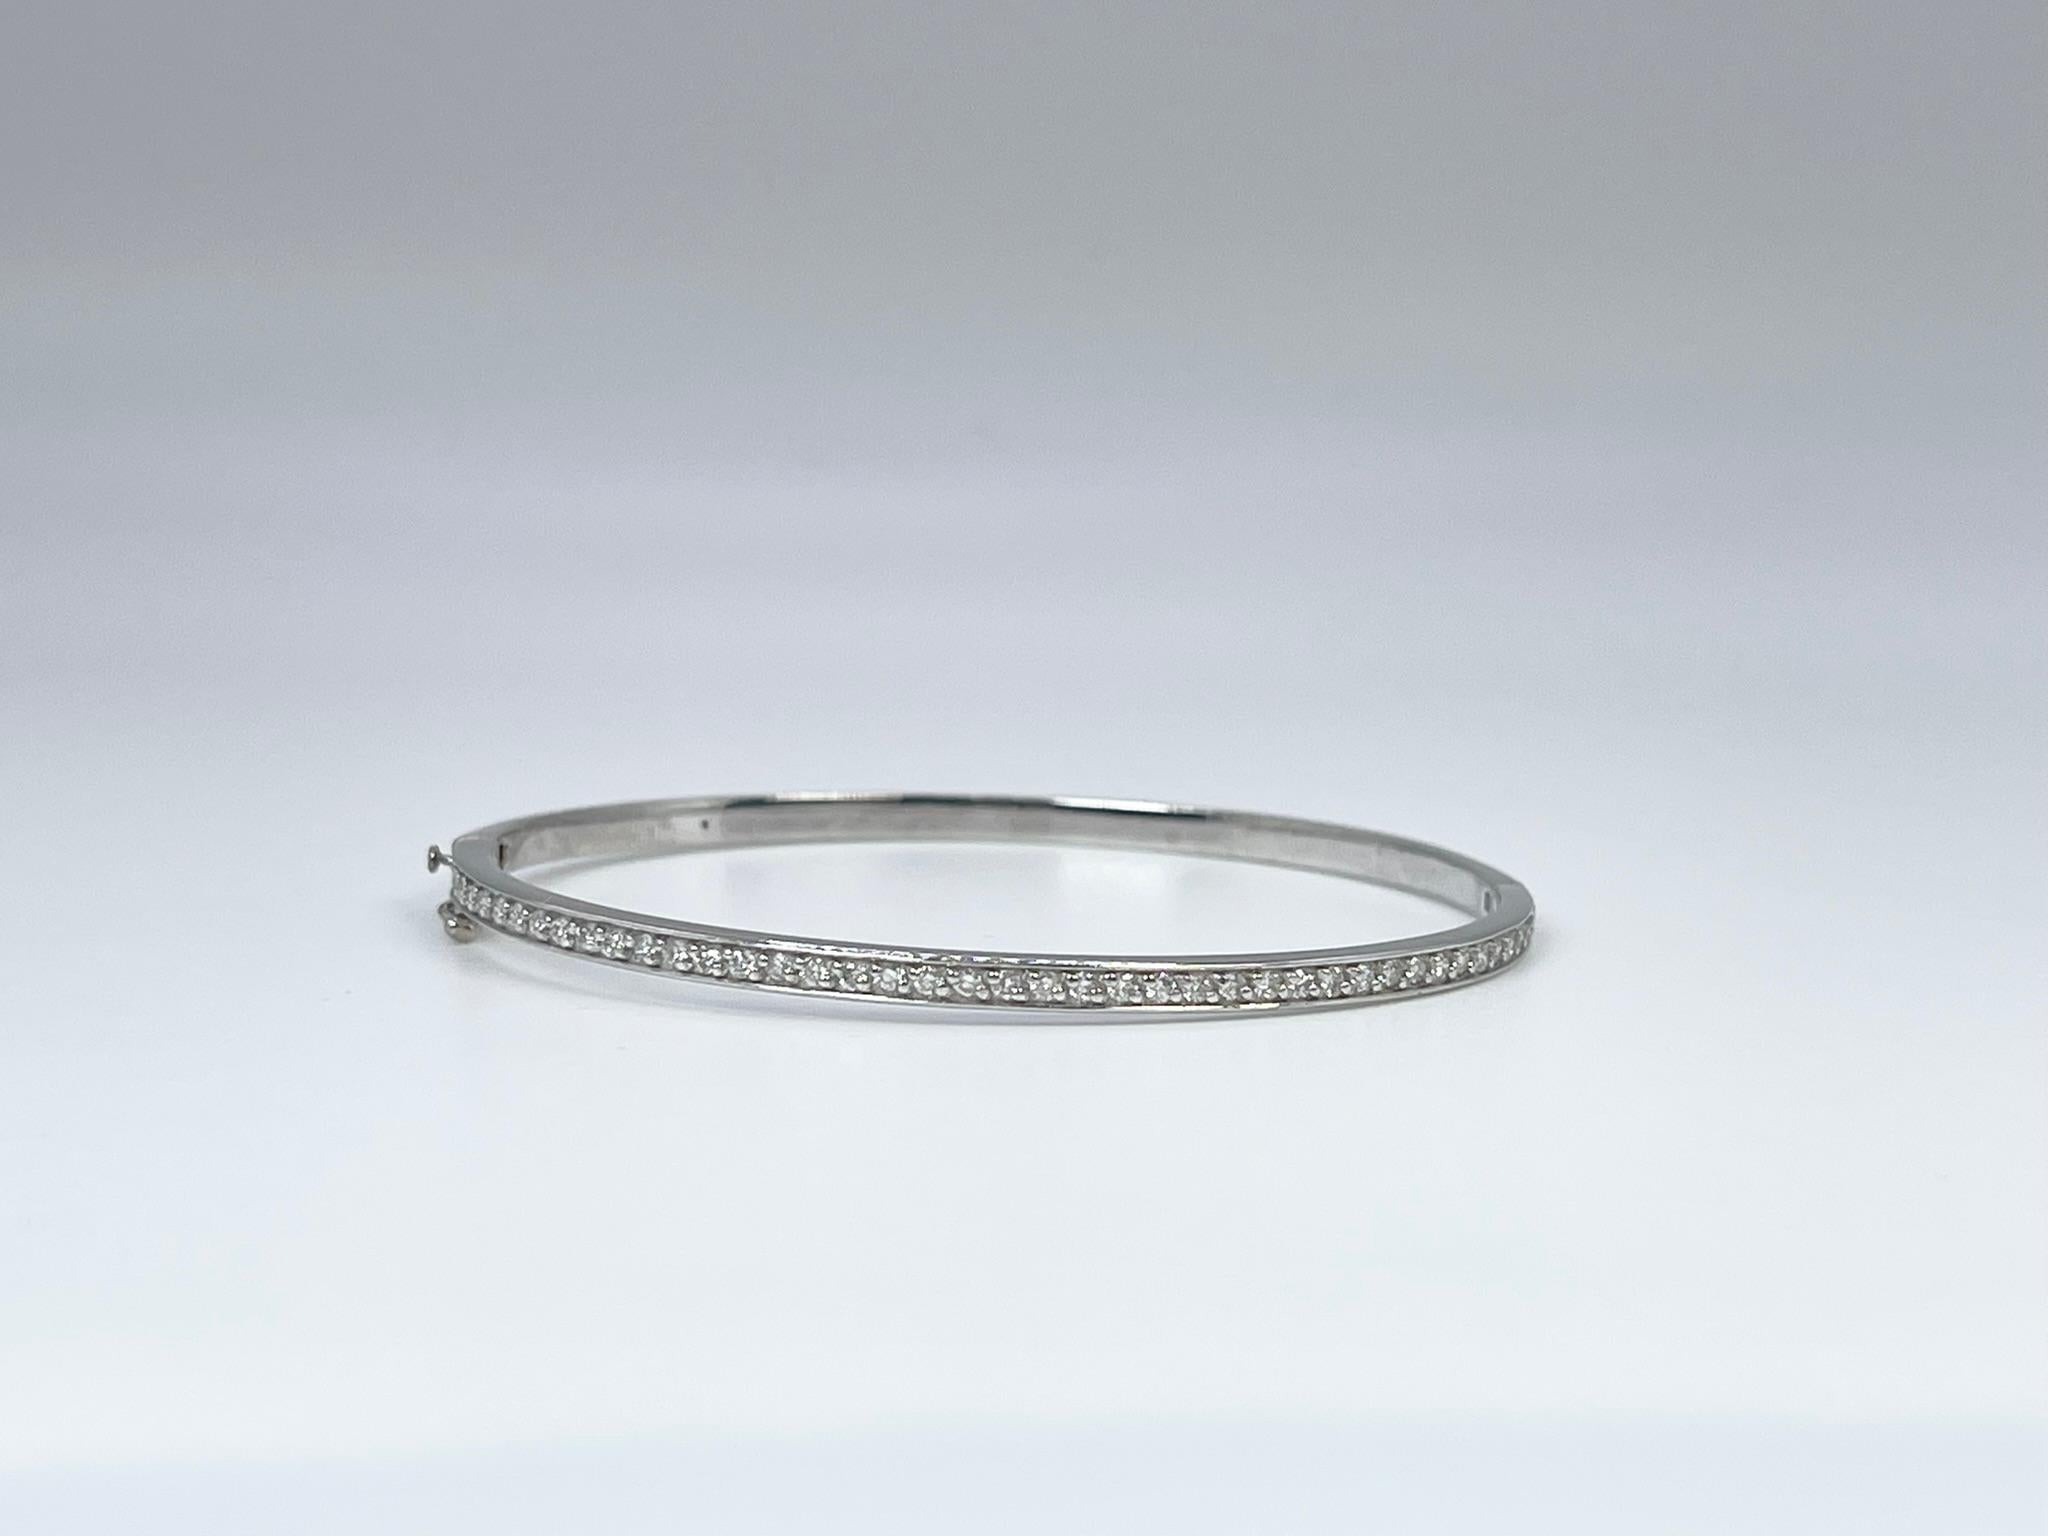 Diamond Bangle bracelet in 14KT white gold.

GRAM WEIGHT: 9.42gr
METAL: 14KT WHITE gold

NATURAL DIAMOND(S)
Cut: Round 
Color: G (average)
Clarity: VS-SI (average)
Carat: 0.45ct
Length: 2.1 inches long by 1.9 inches wide
Item number: 170-00008